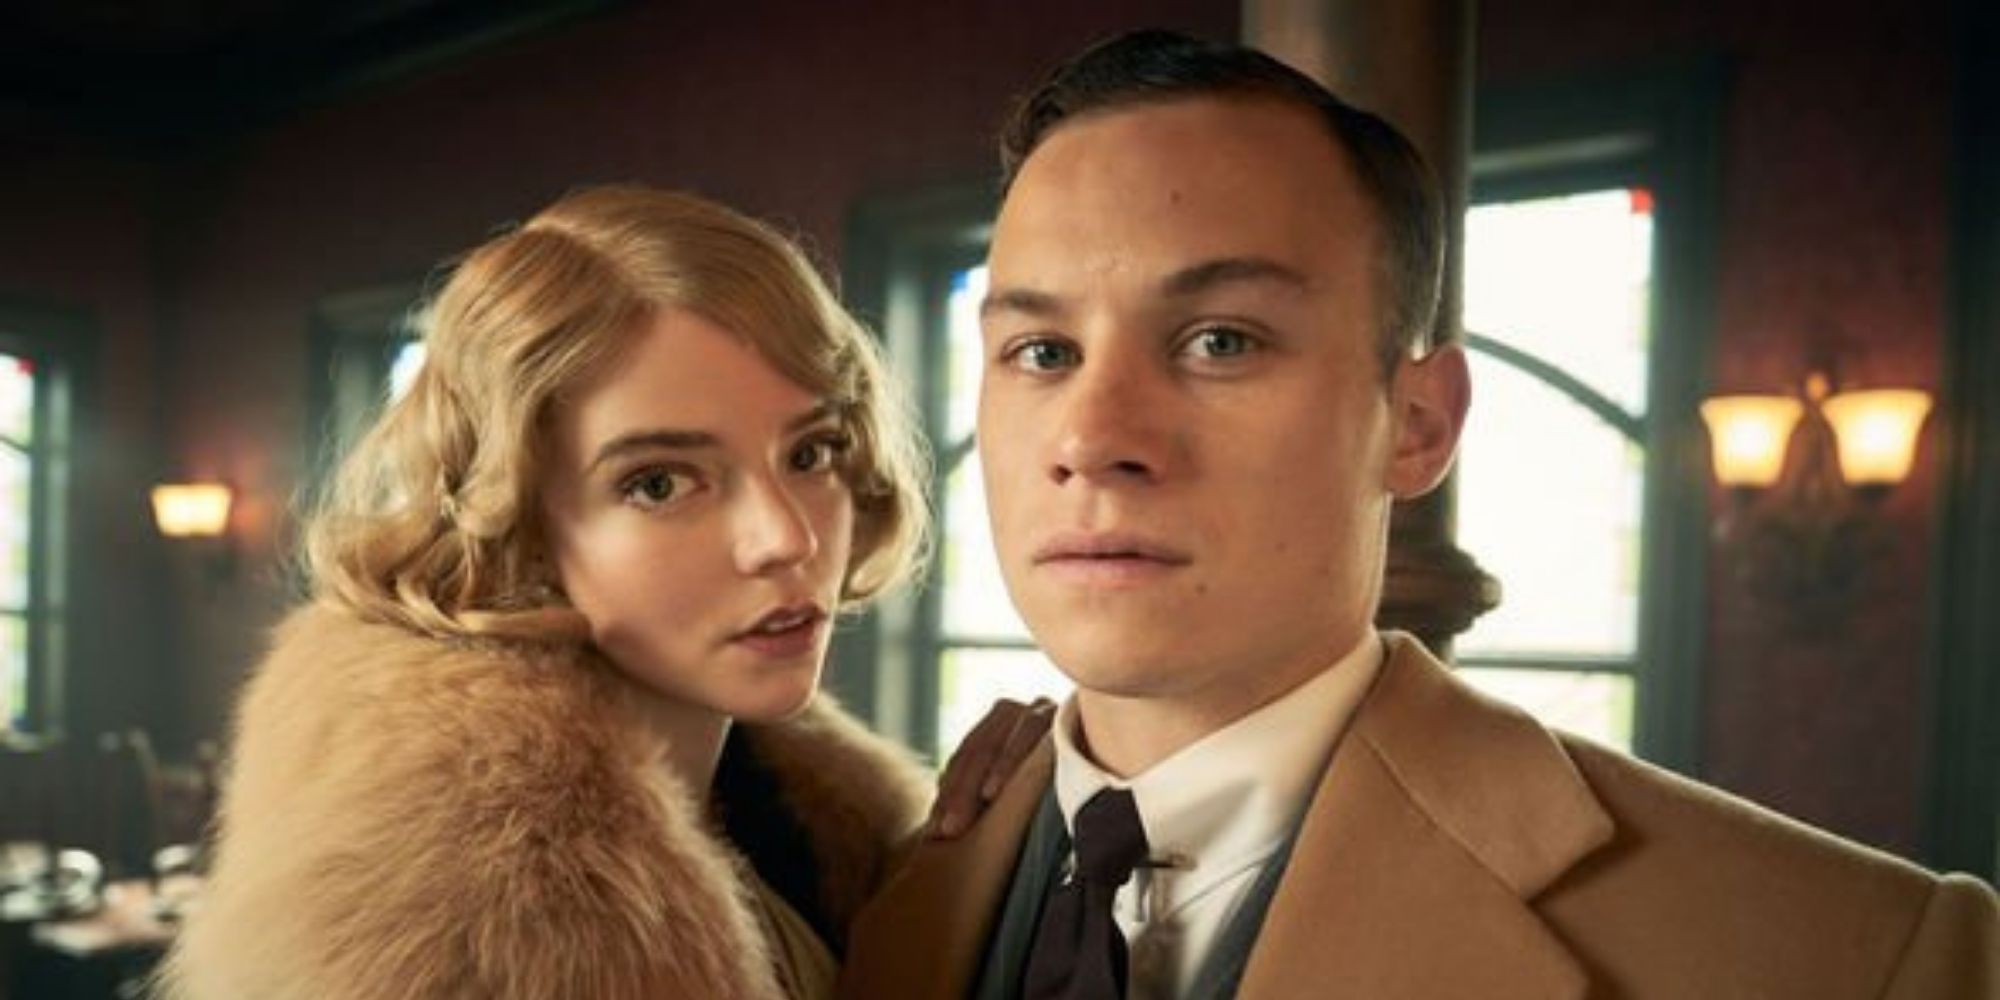 Image of Michael and Gina Gray from TV show Peaky Blinders.